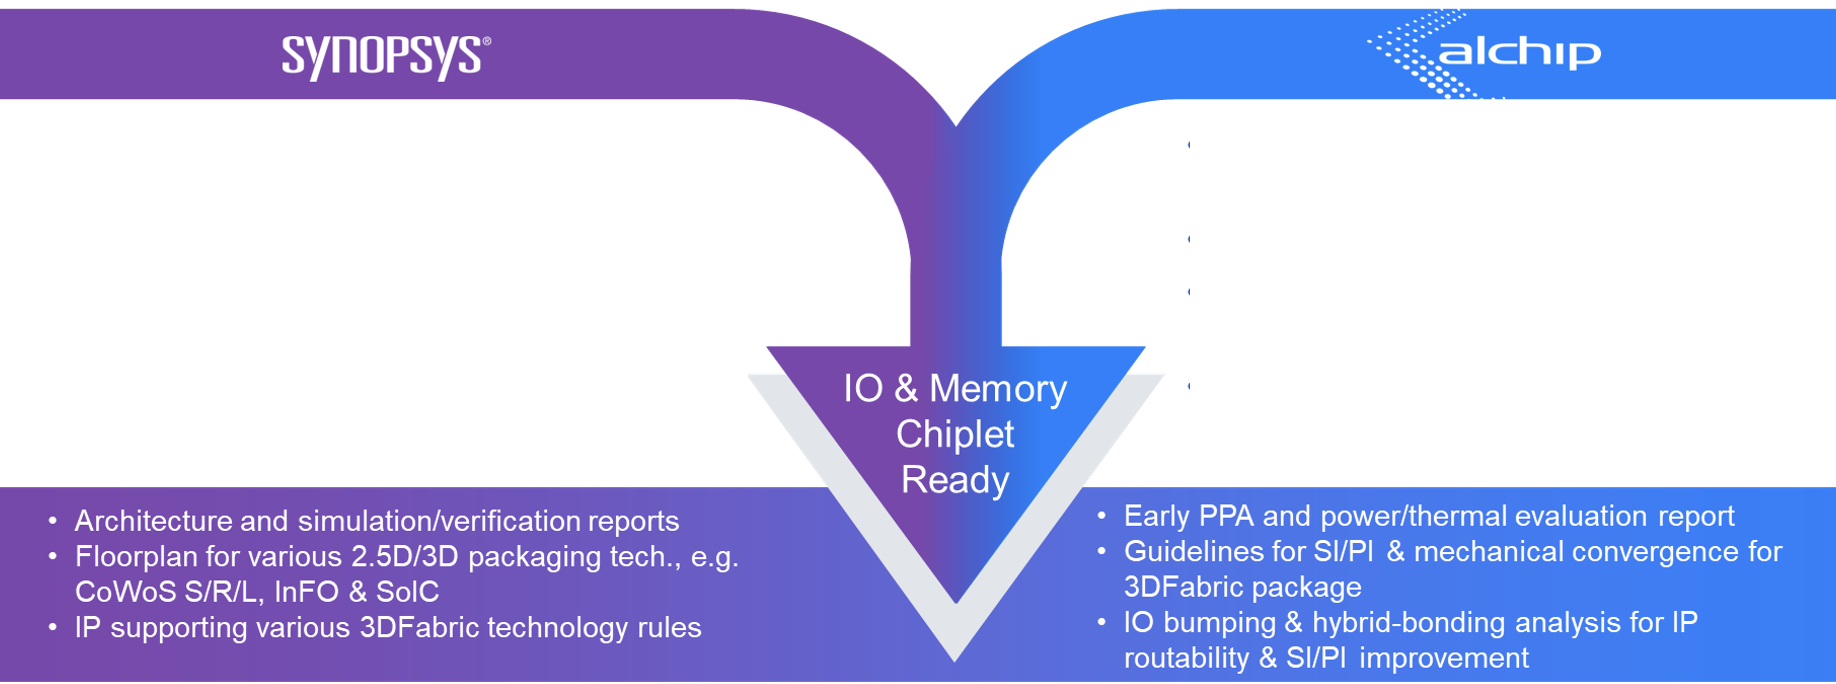 Synopsys and Alchip Accelerate IO & Memory Chiplet Design for Multi Die Systems